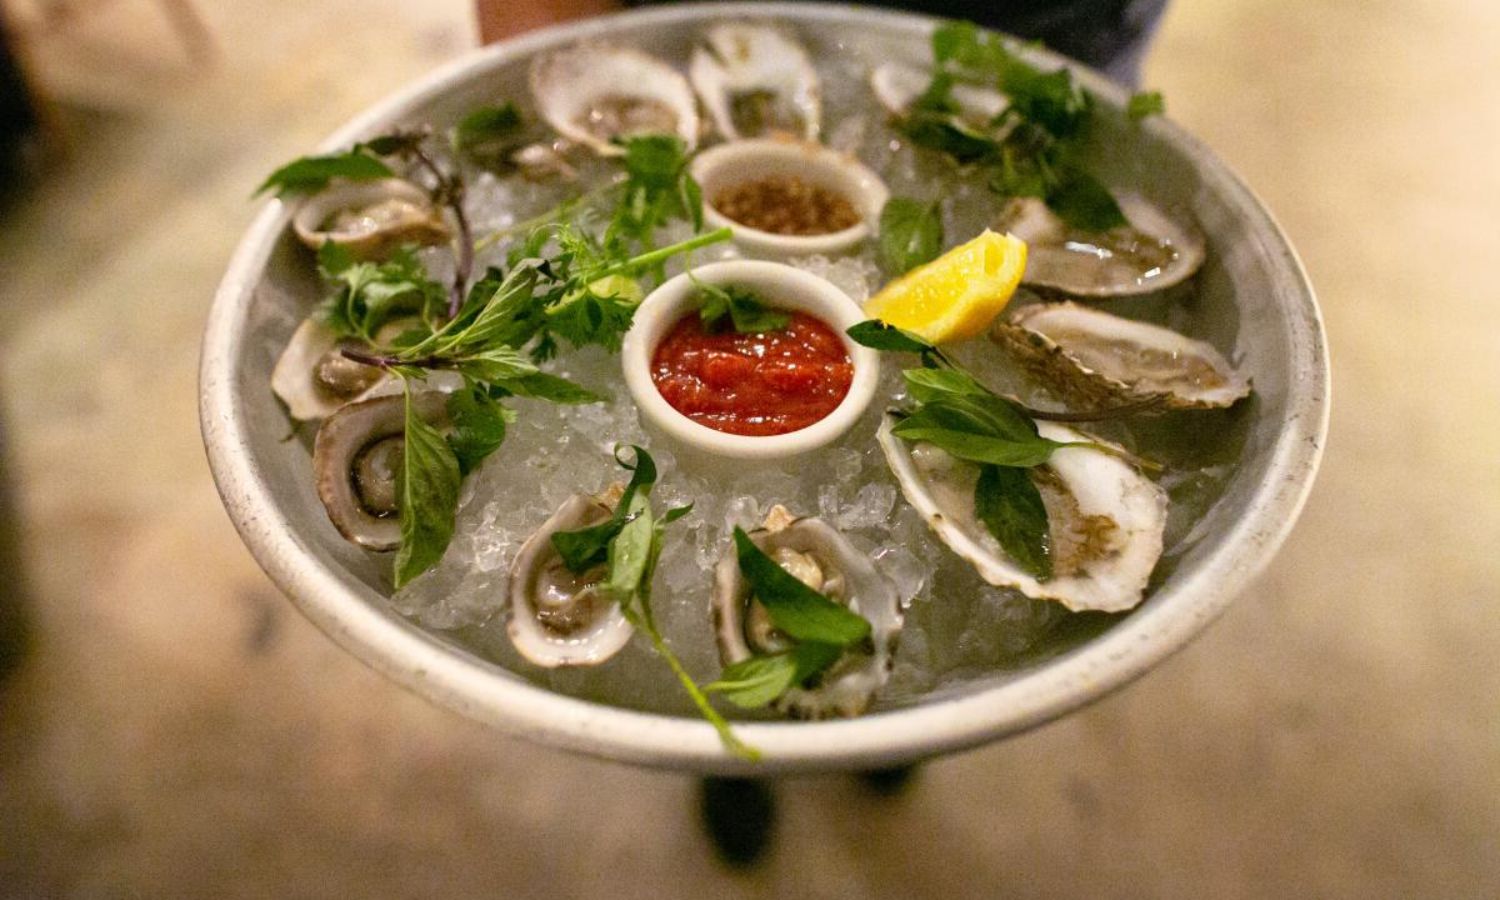 California Issues Warning on Raw Oysters